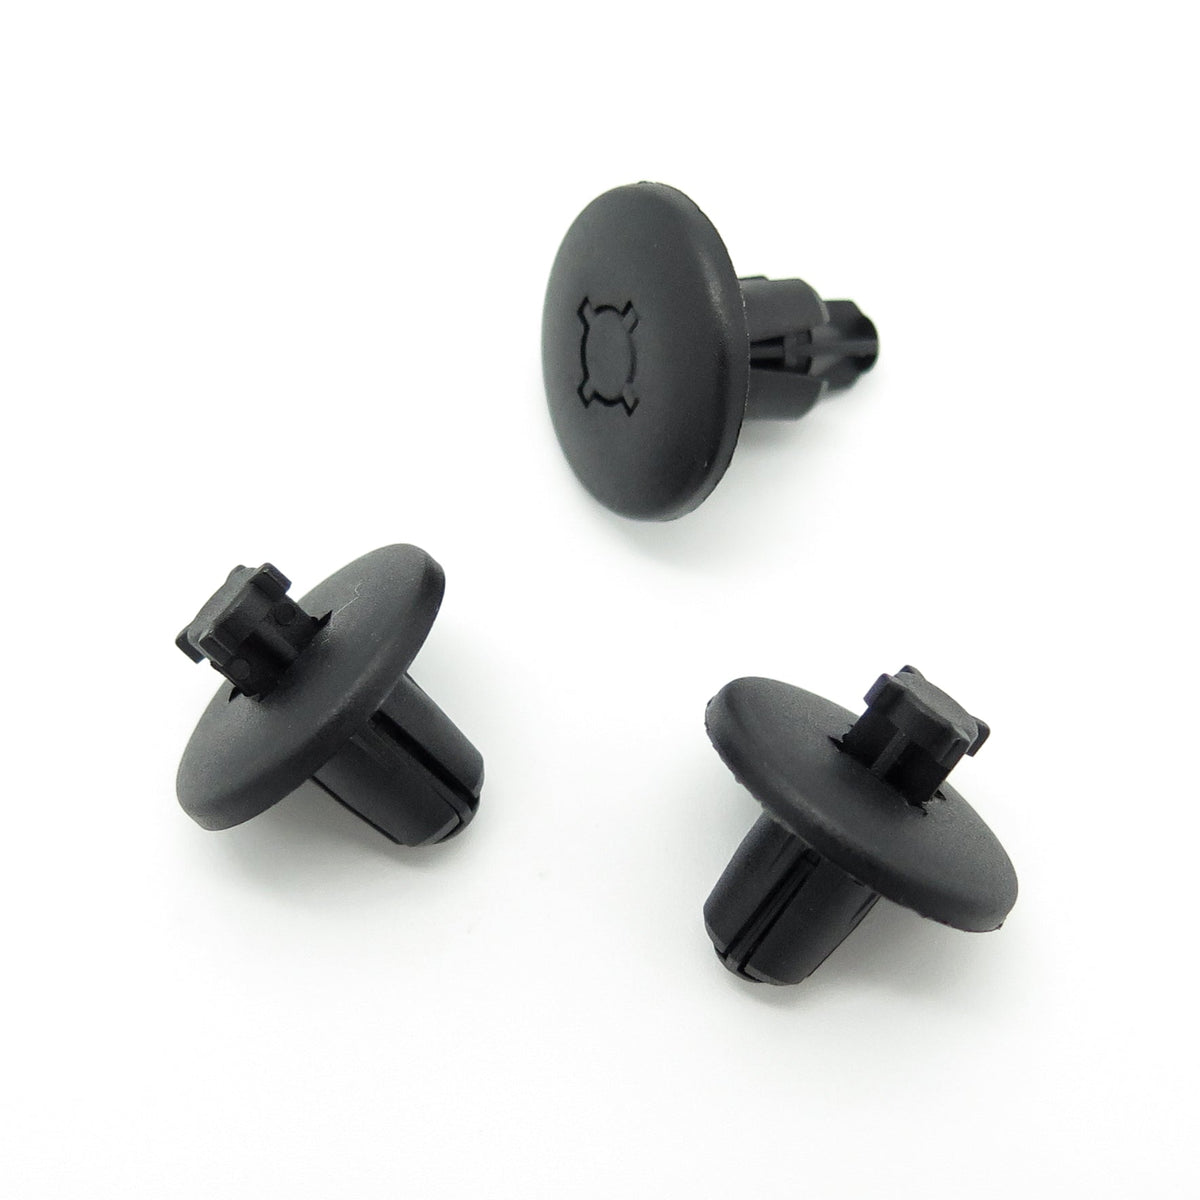 peugeot plastic clips, peugeot plastic clips Suppliers and